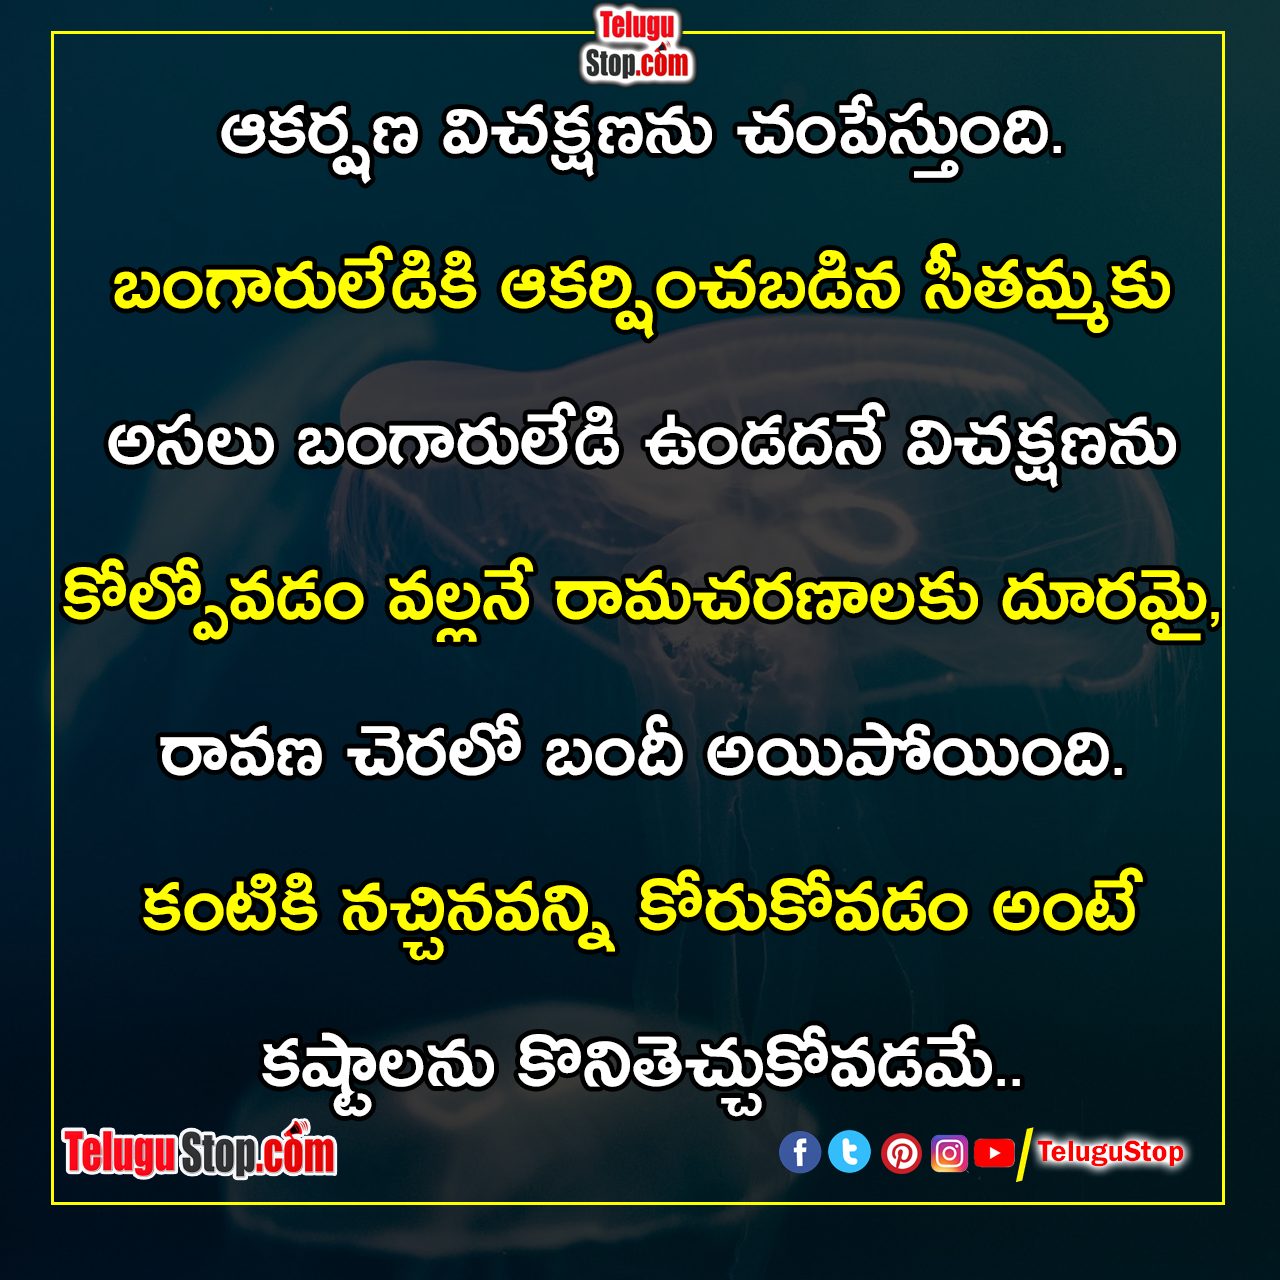 Stayevil, Wordmouth-Telugu Daily Quotes - Inspirational/Motivational/Love/Friendship/Good Morning Quote